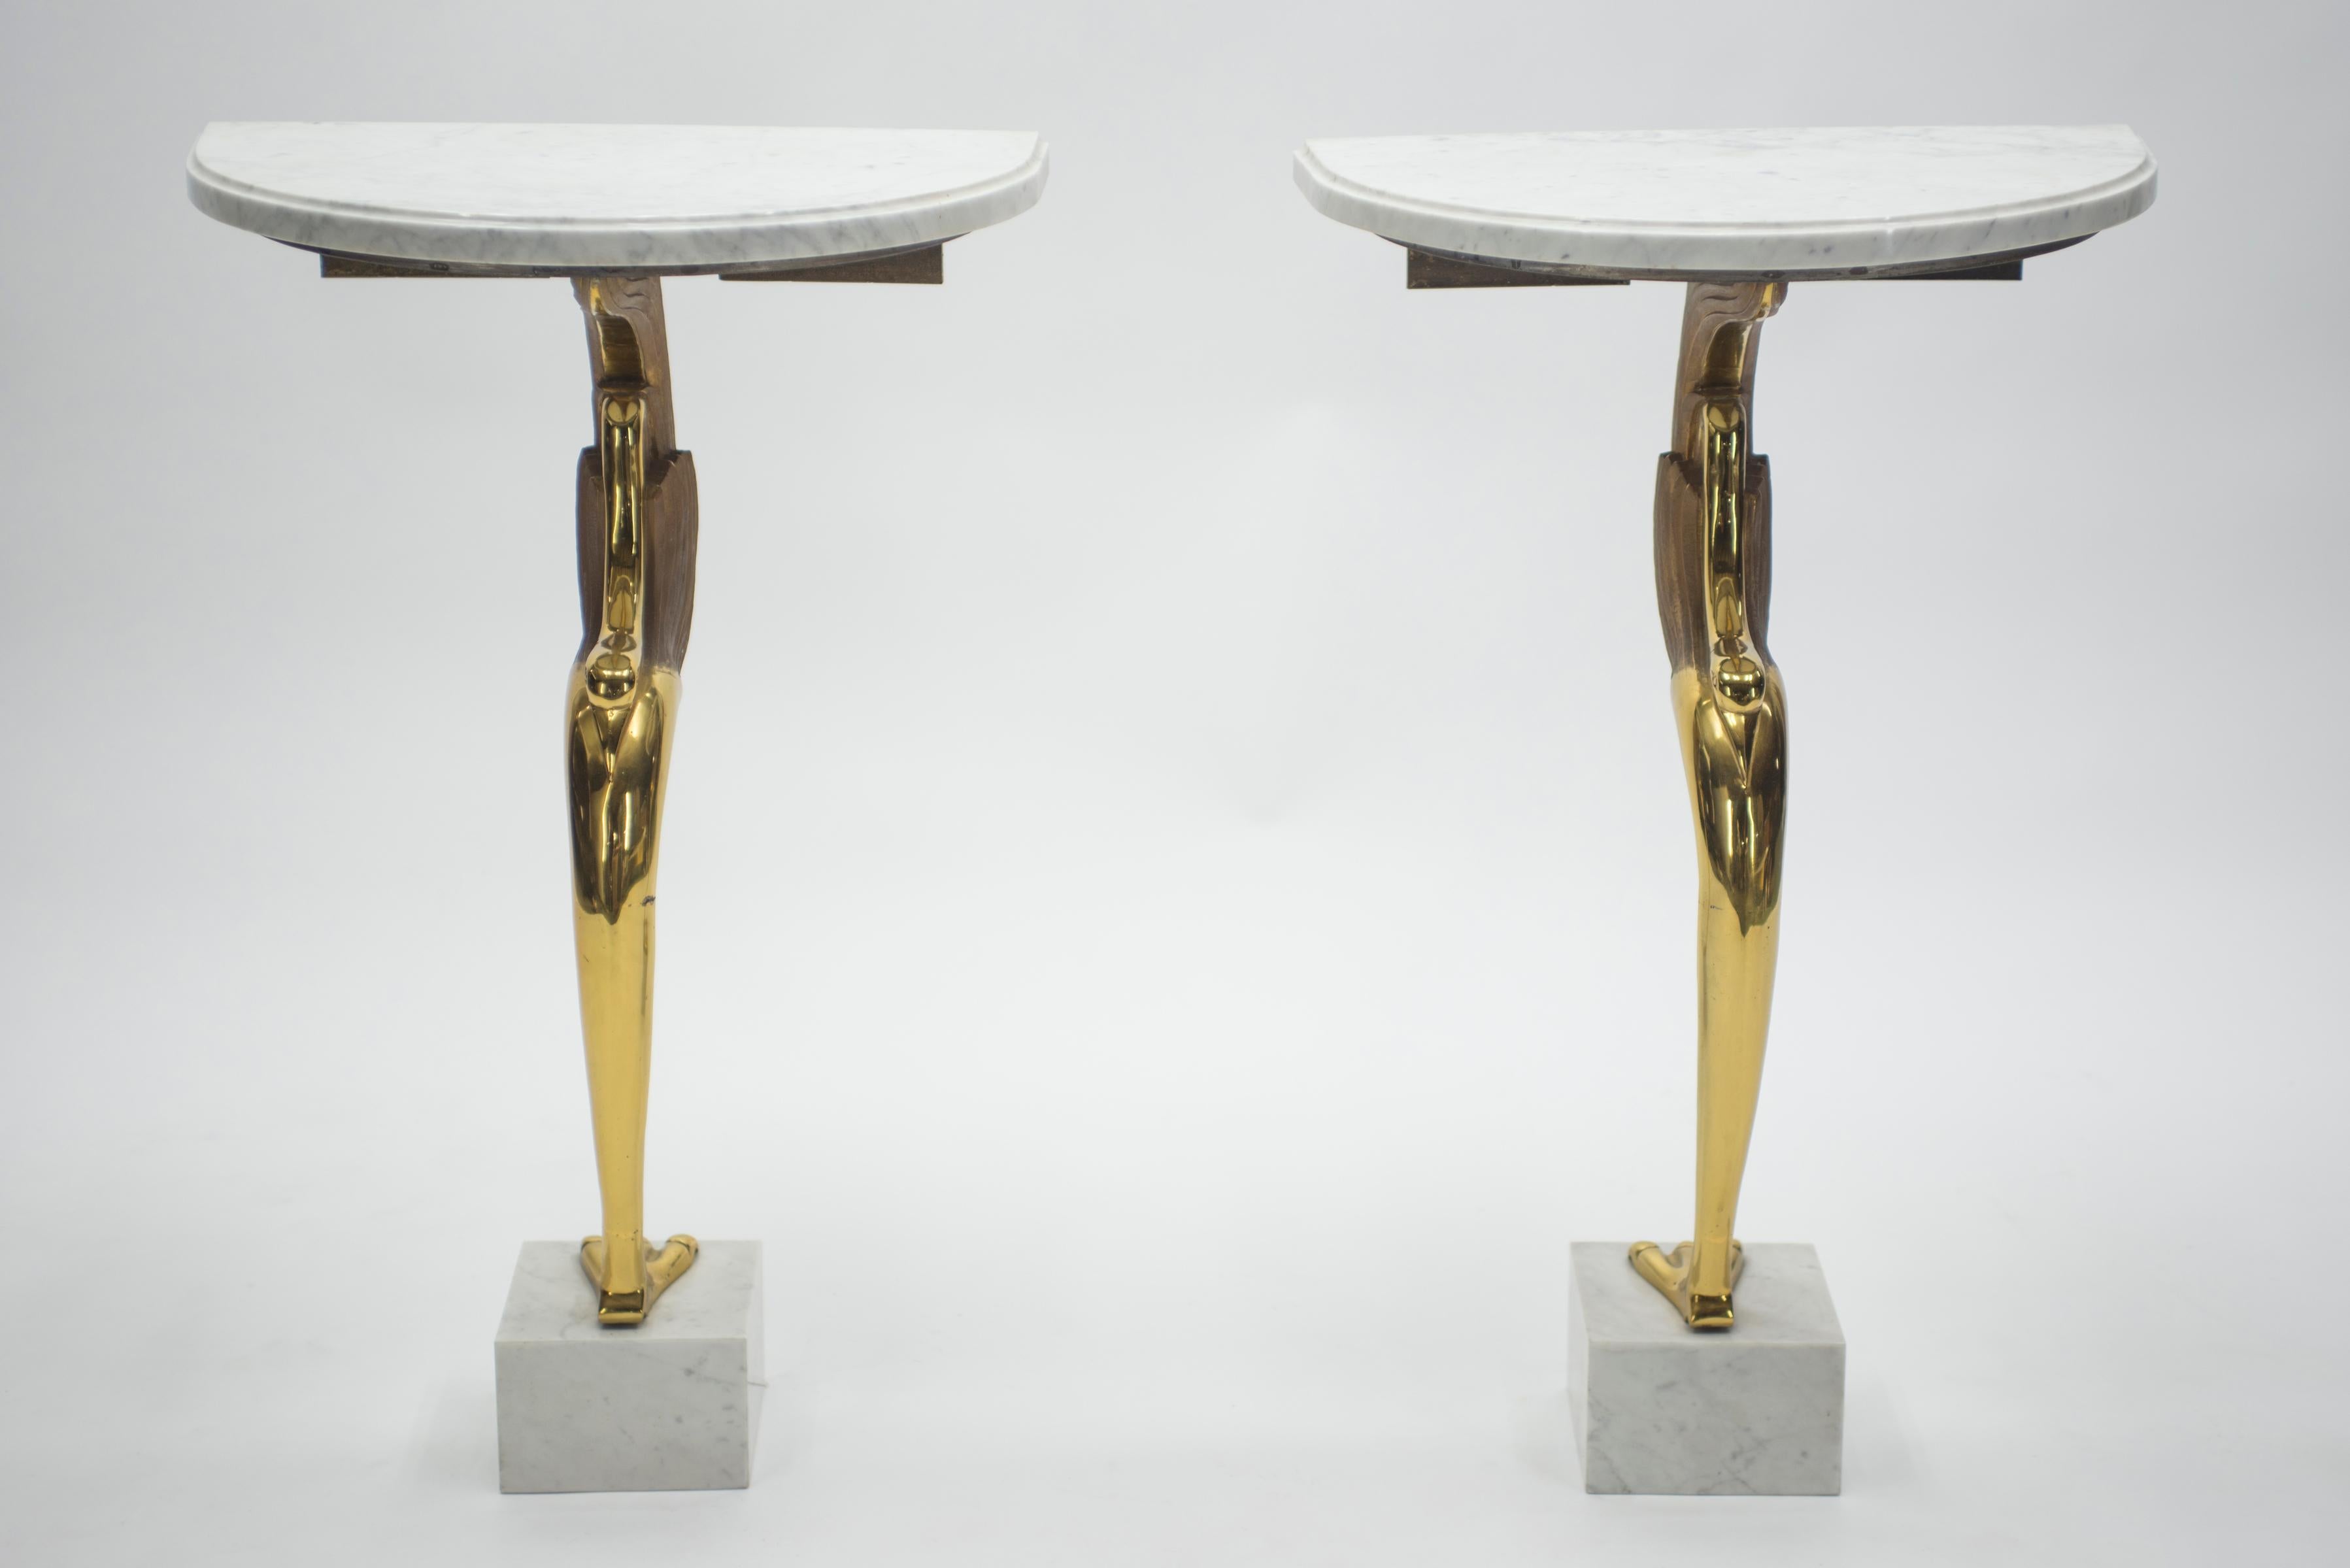 Hollywood Regency Rare Midcentury Pair of Brass Marble Console Tables Robert Thibier, 1970s